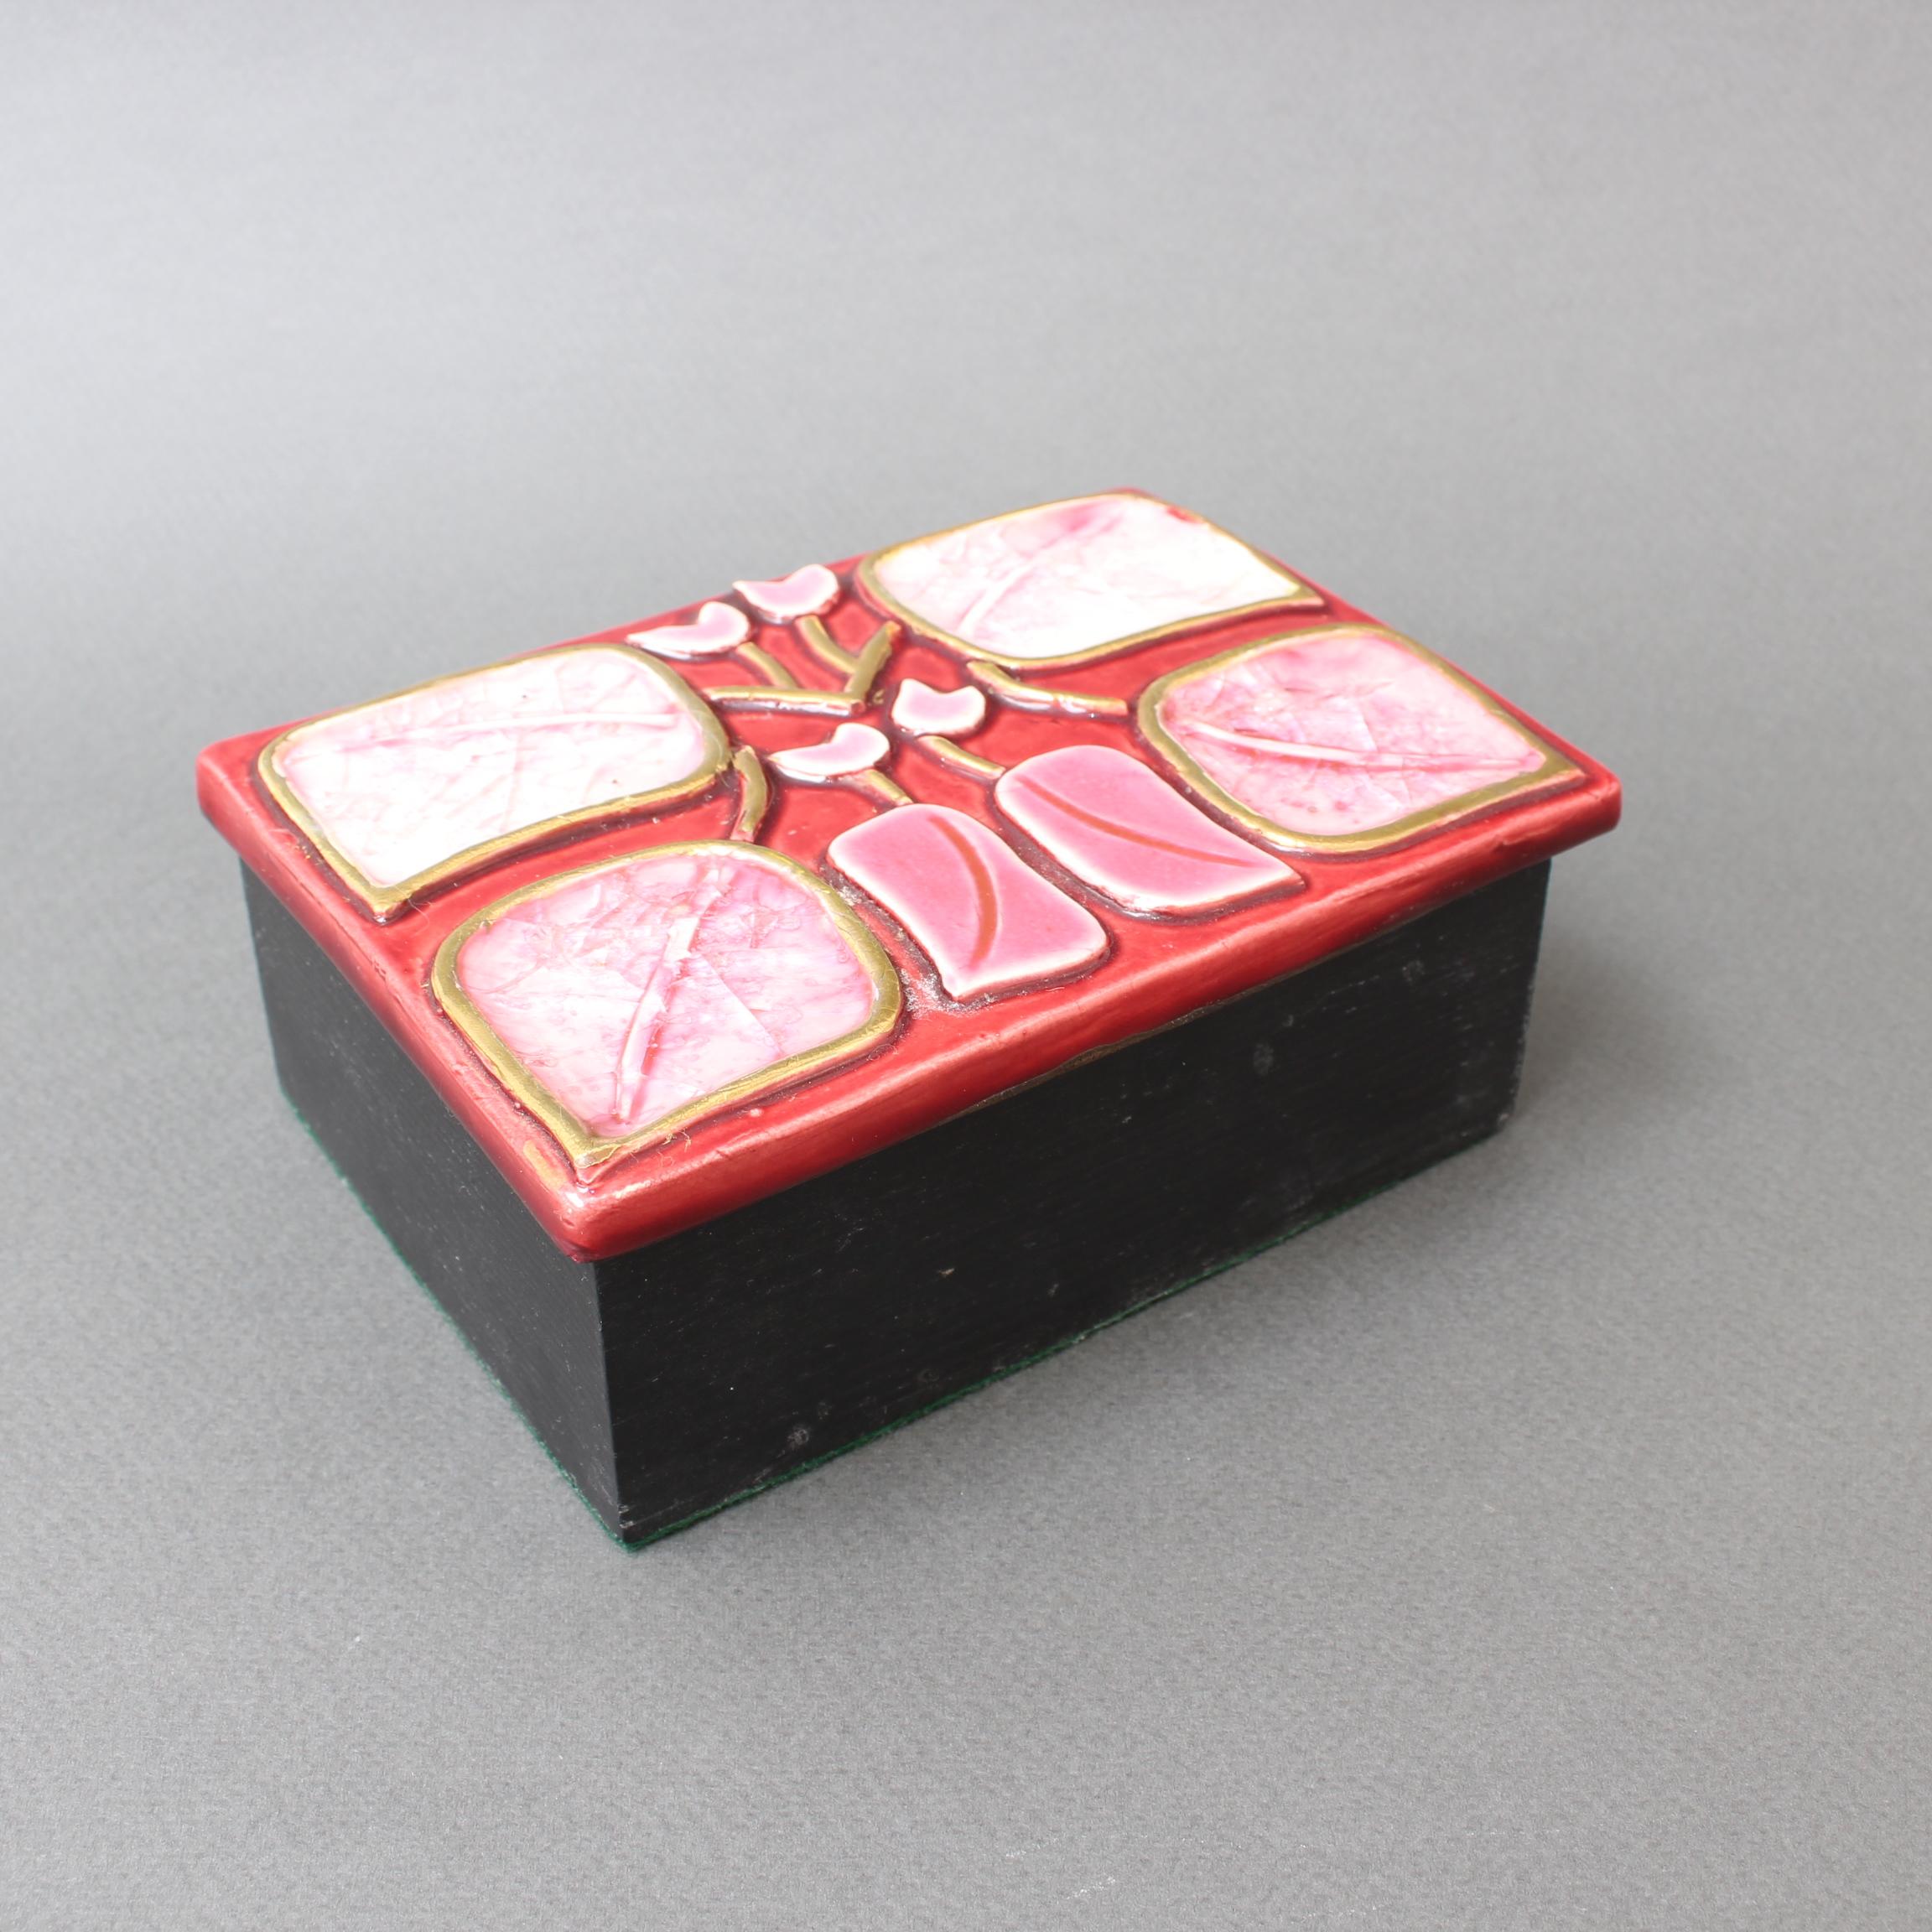 French Jewellery Box with Decorative Enamel Lid by François Lembo, circa 1960s